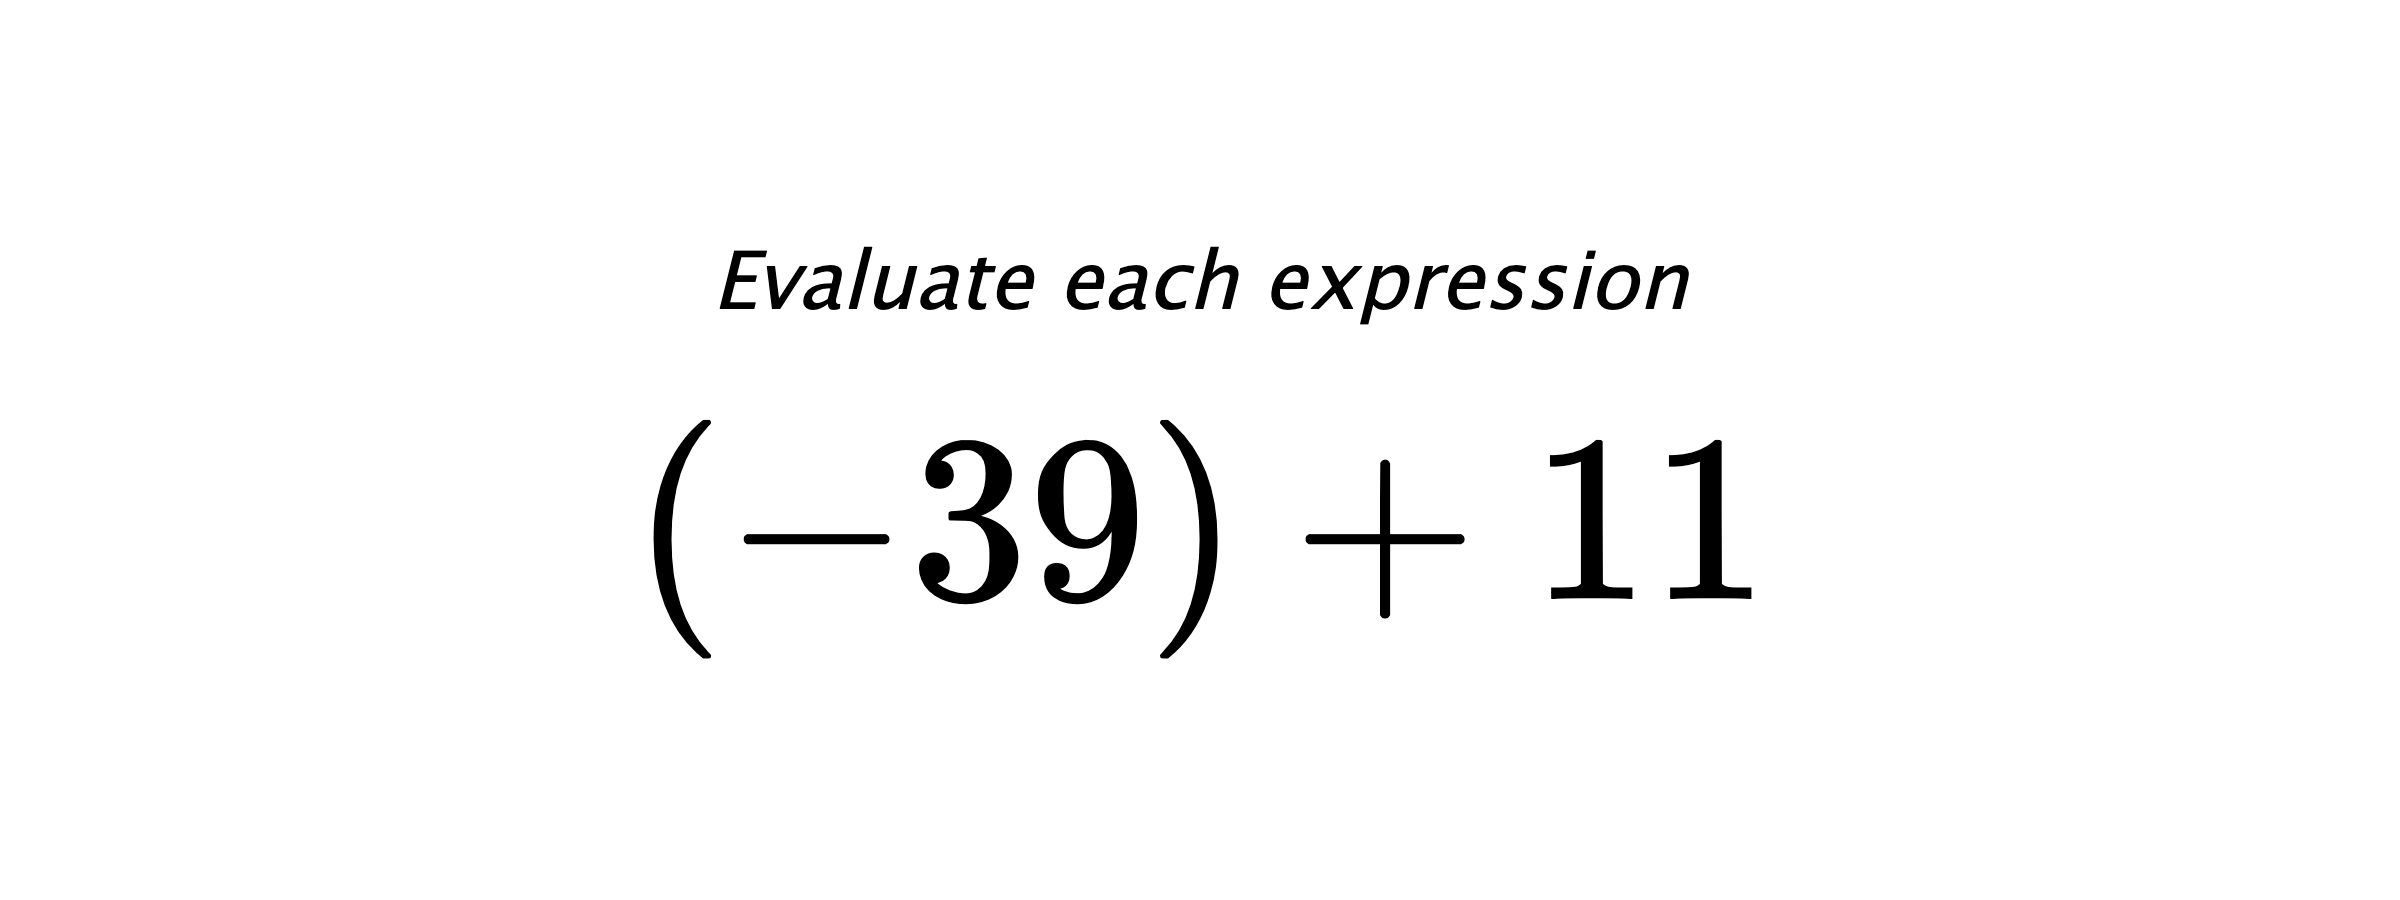 Evaluate each expression $ (-39)+11 $